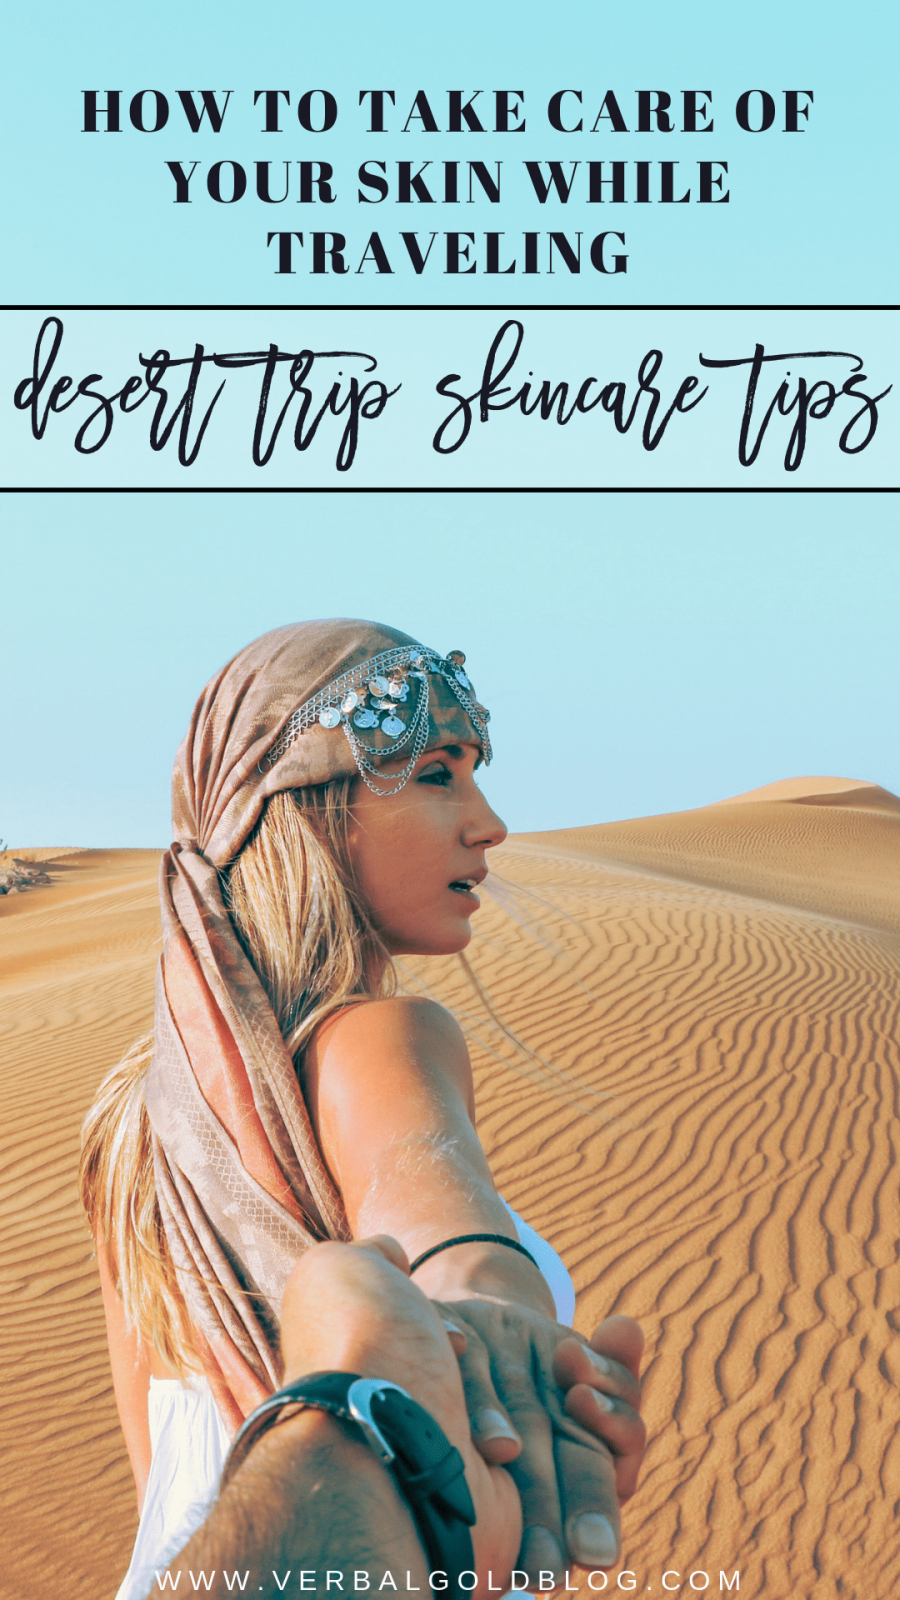 How to Take Care of Your Skin Before Going on a Desert Trip